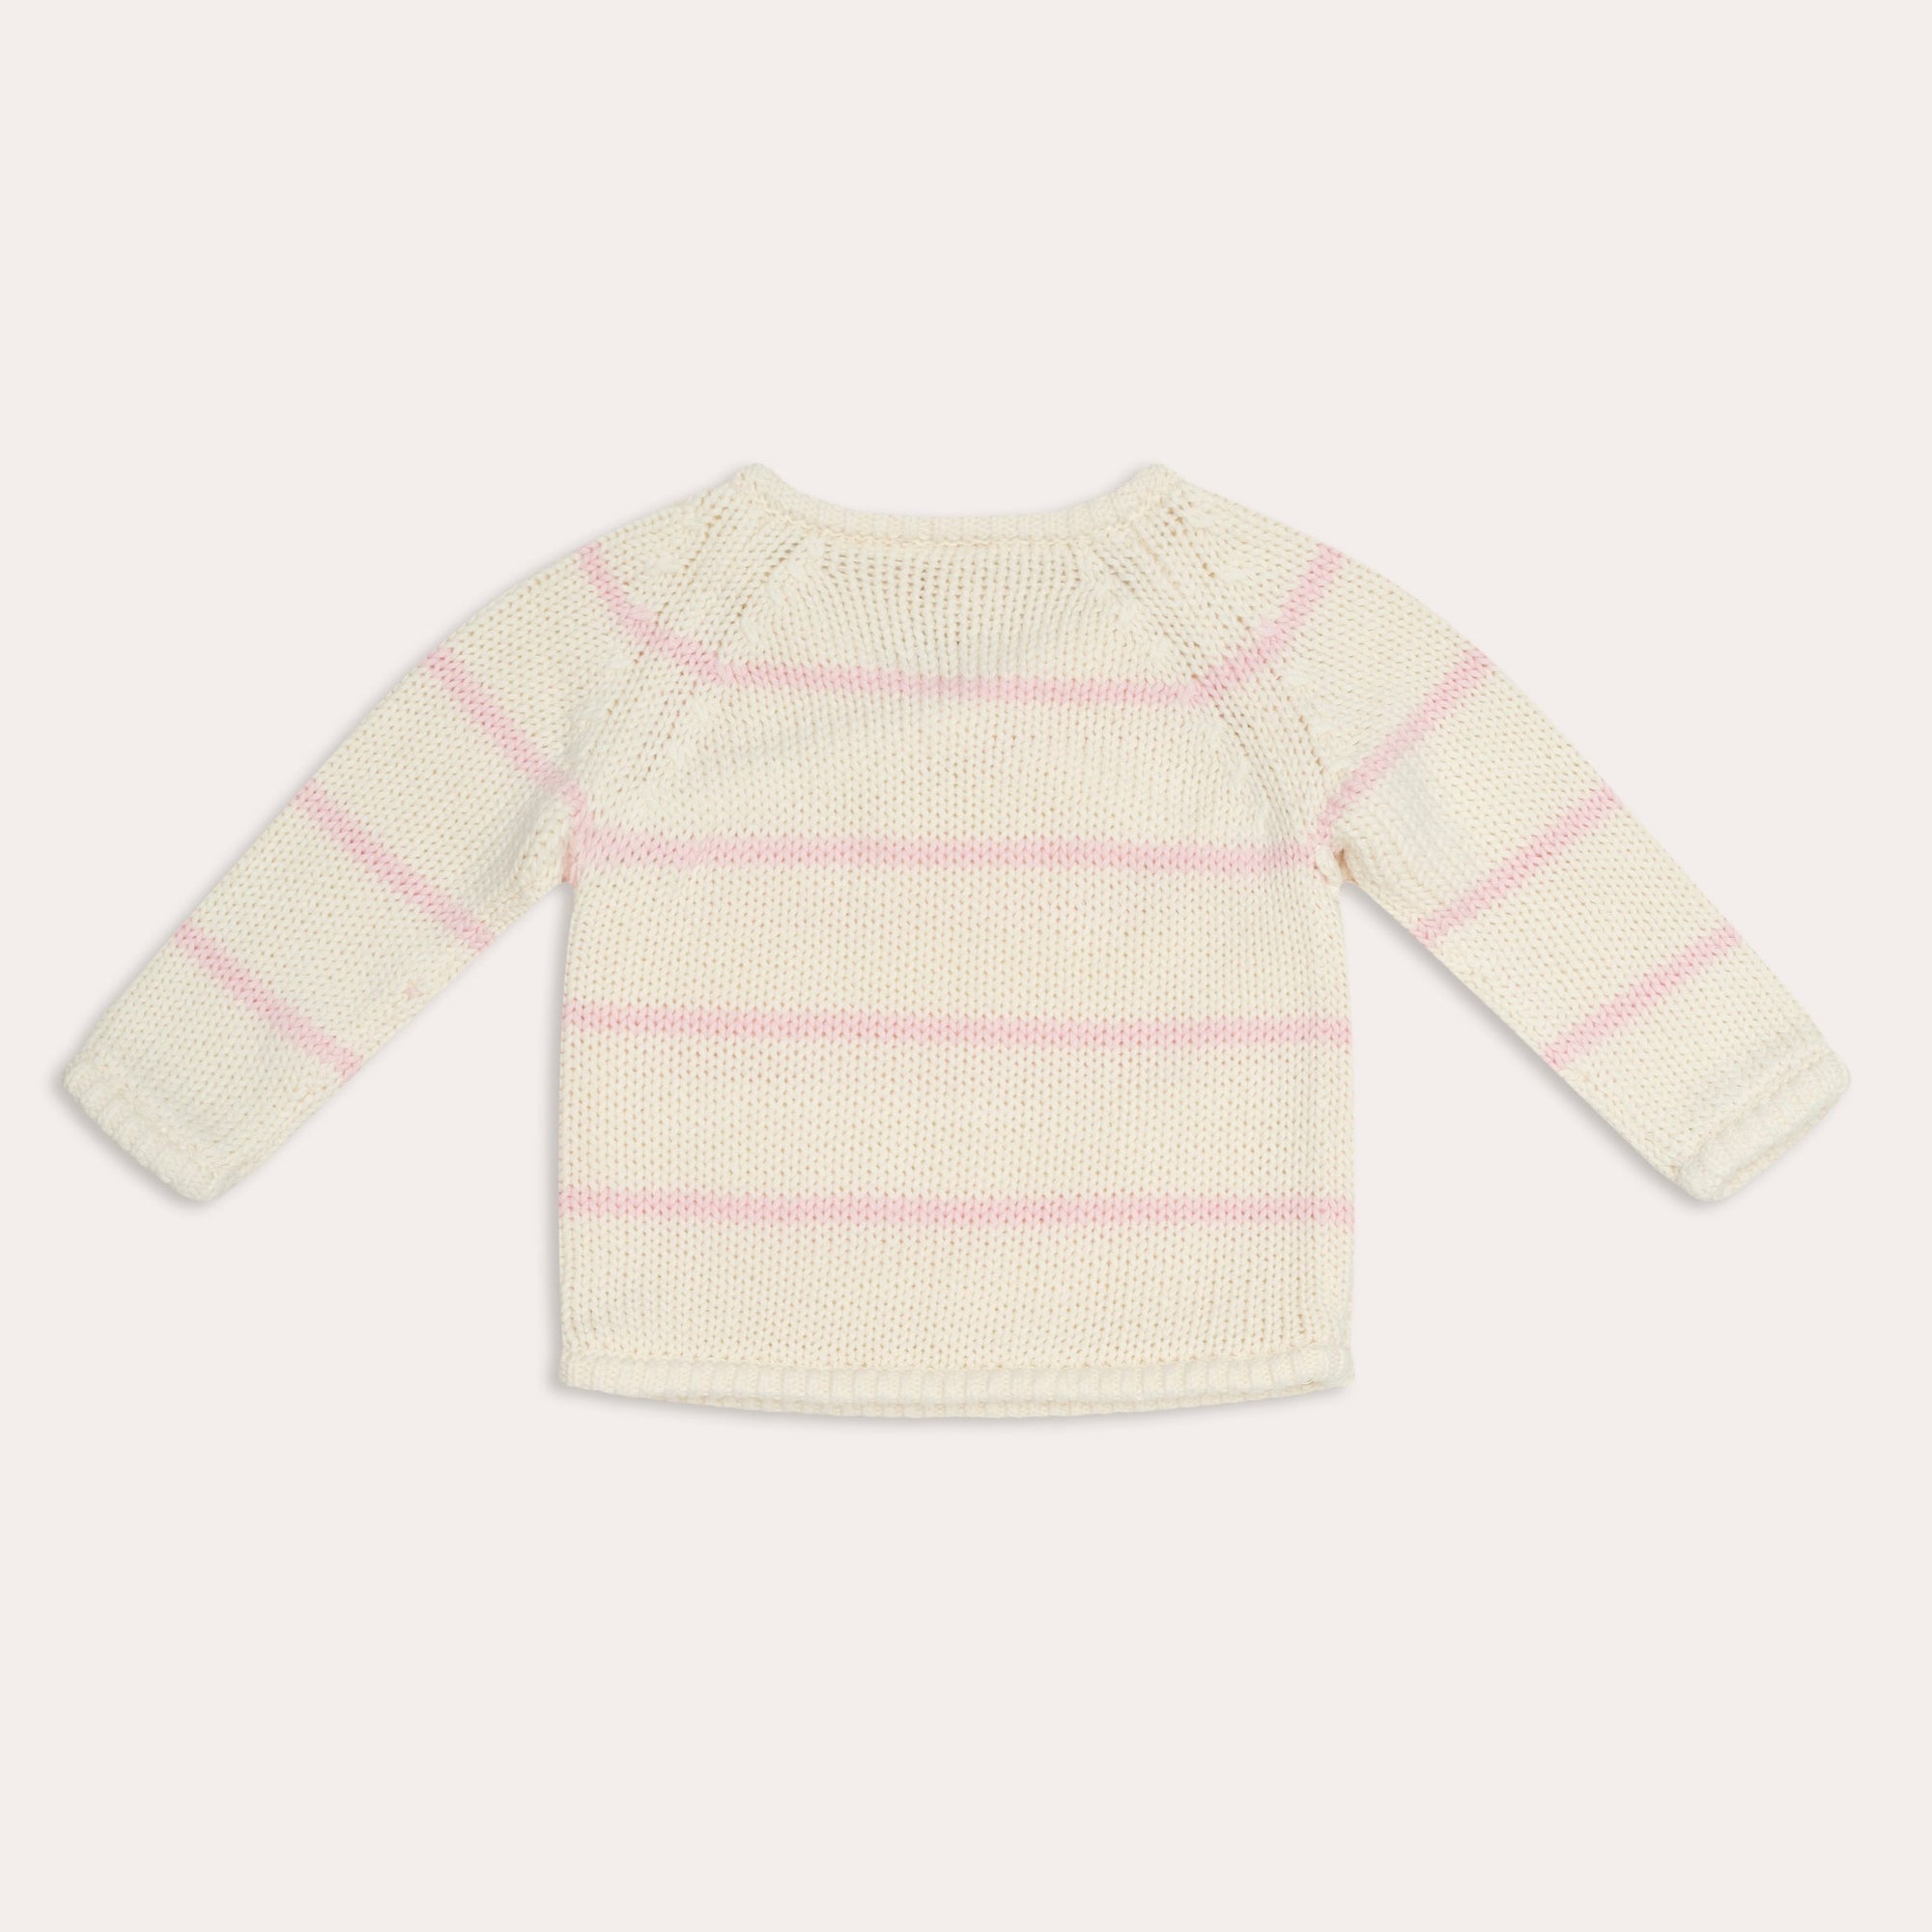 An illoura knit poet jumper with pink and white stripes, perfect for layering.